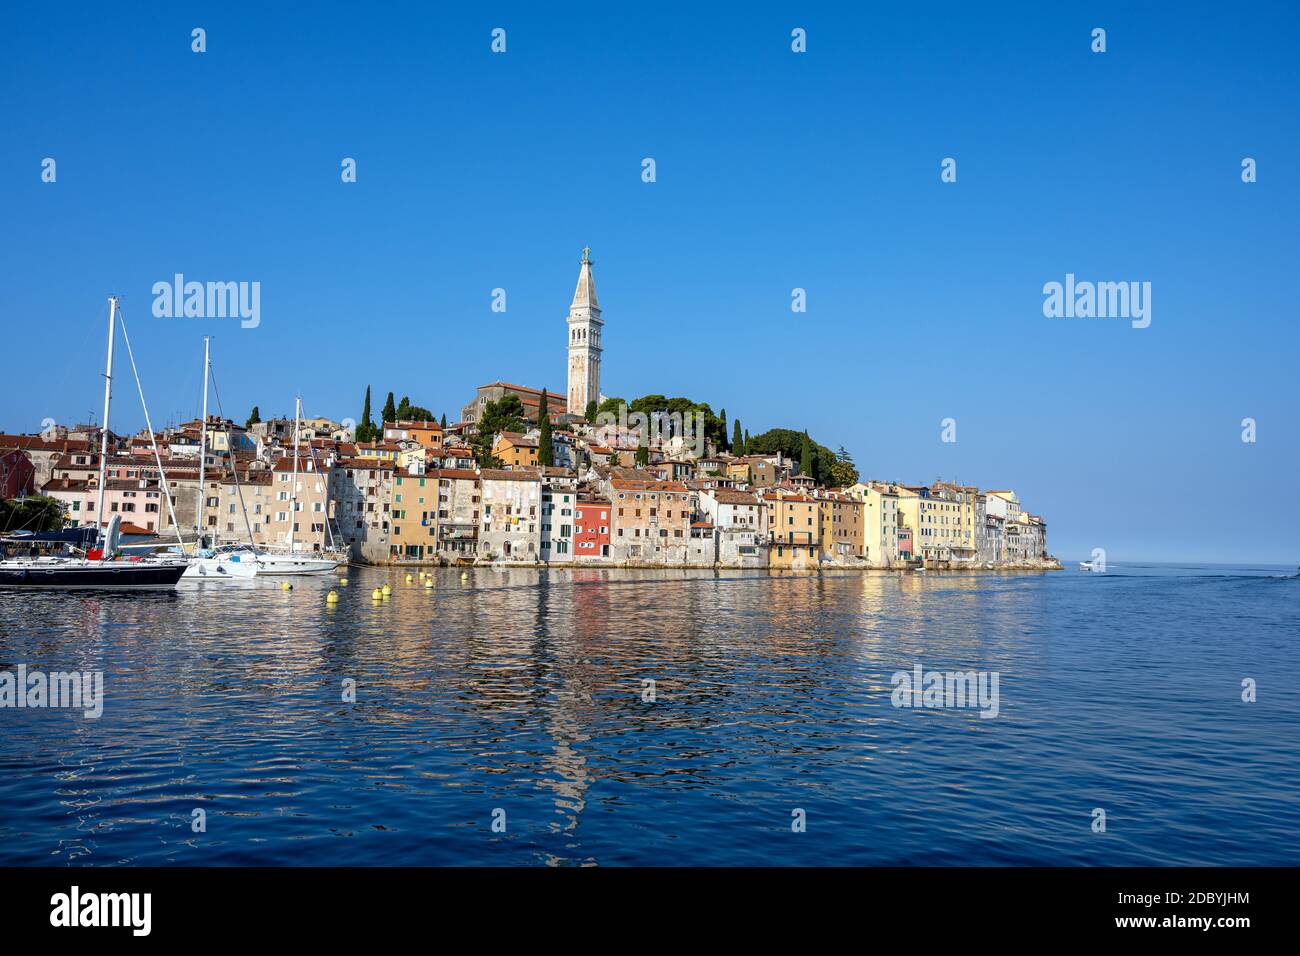 The beautiful old town of Rovinj in Croatia with the iconic church tower Stock Photo